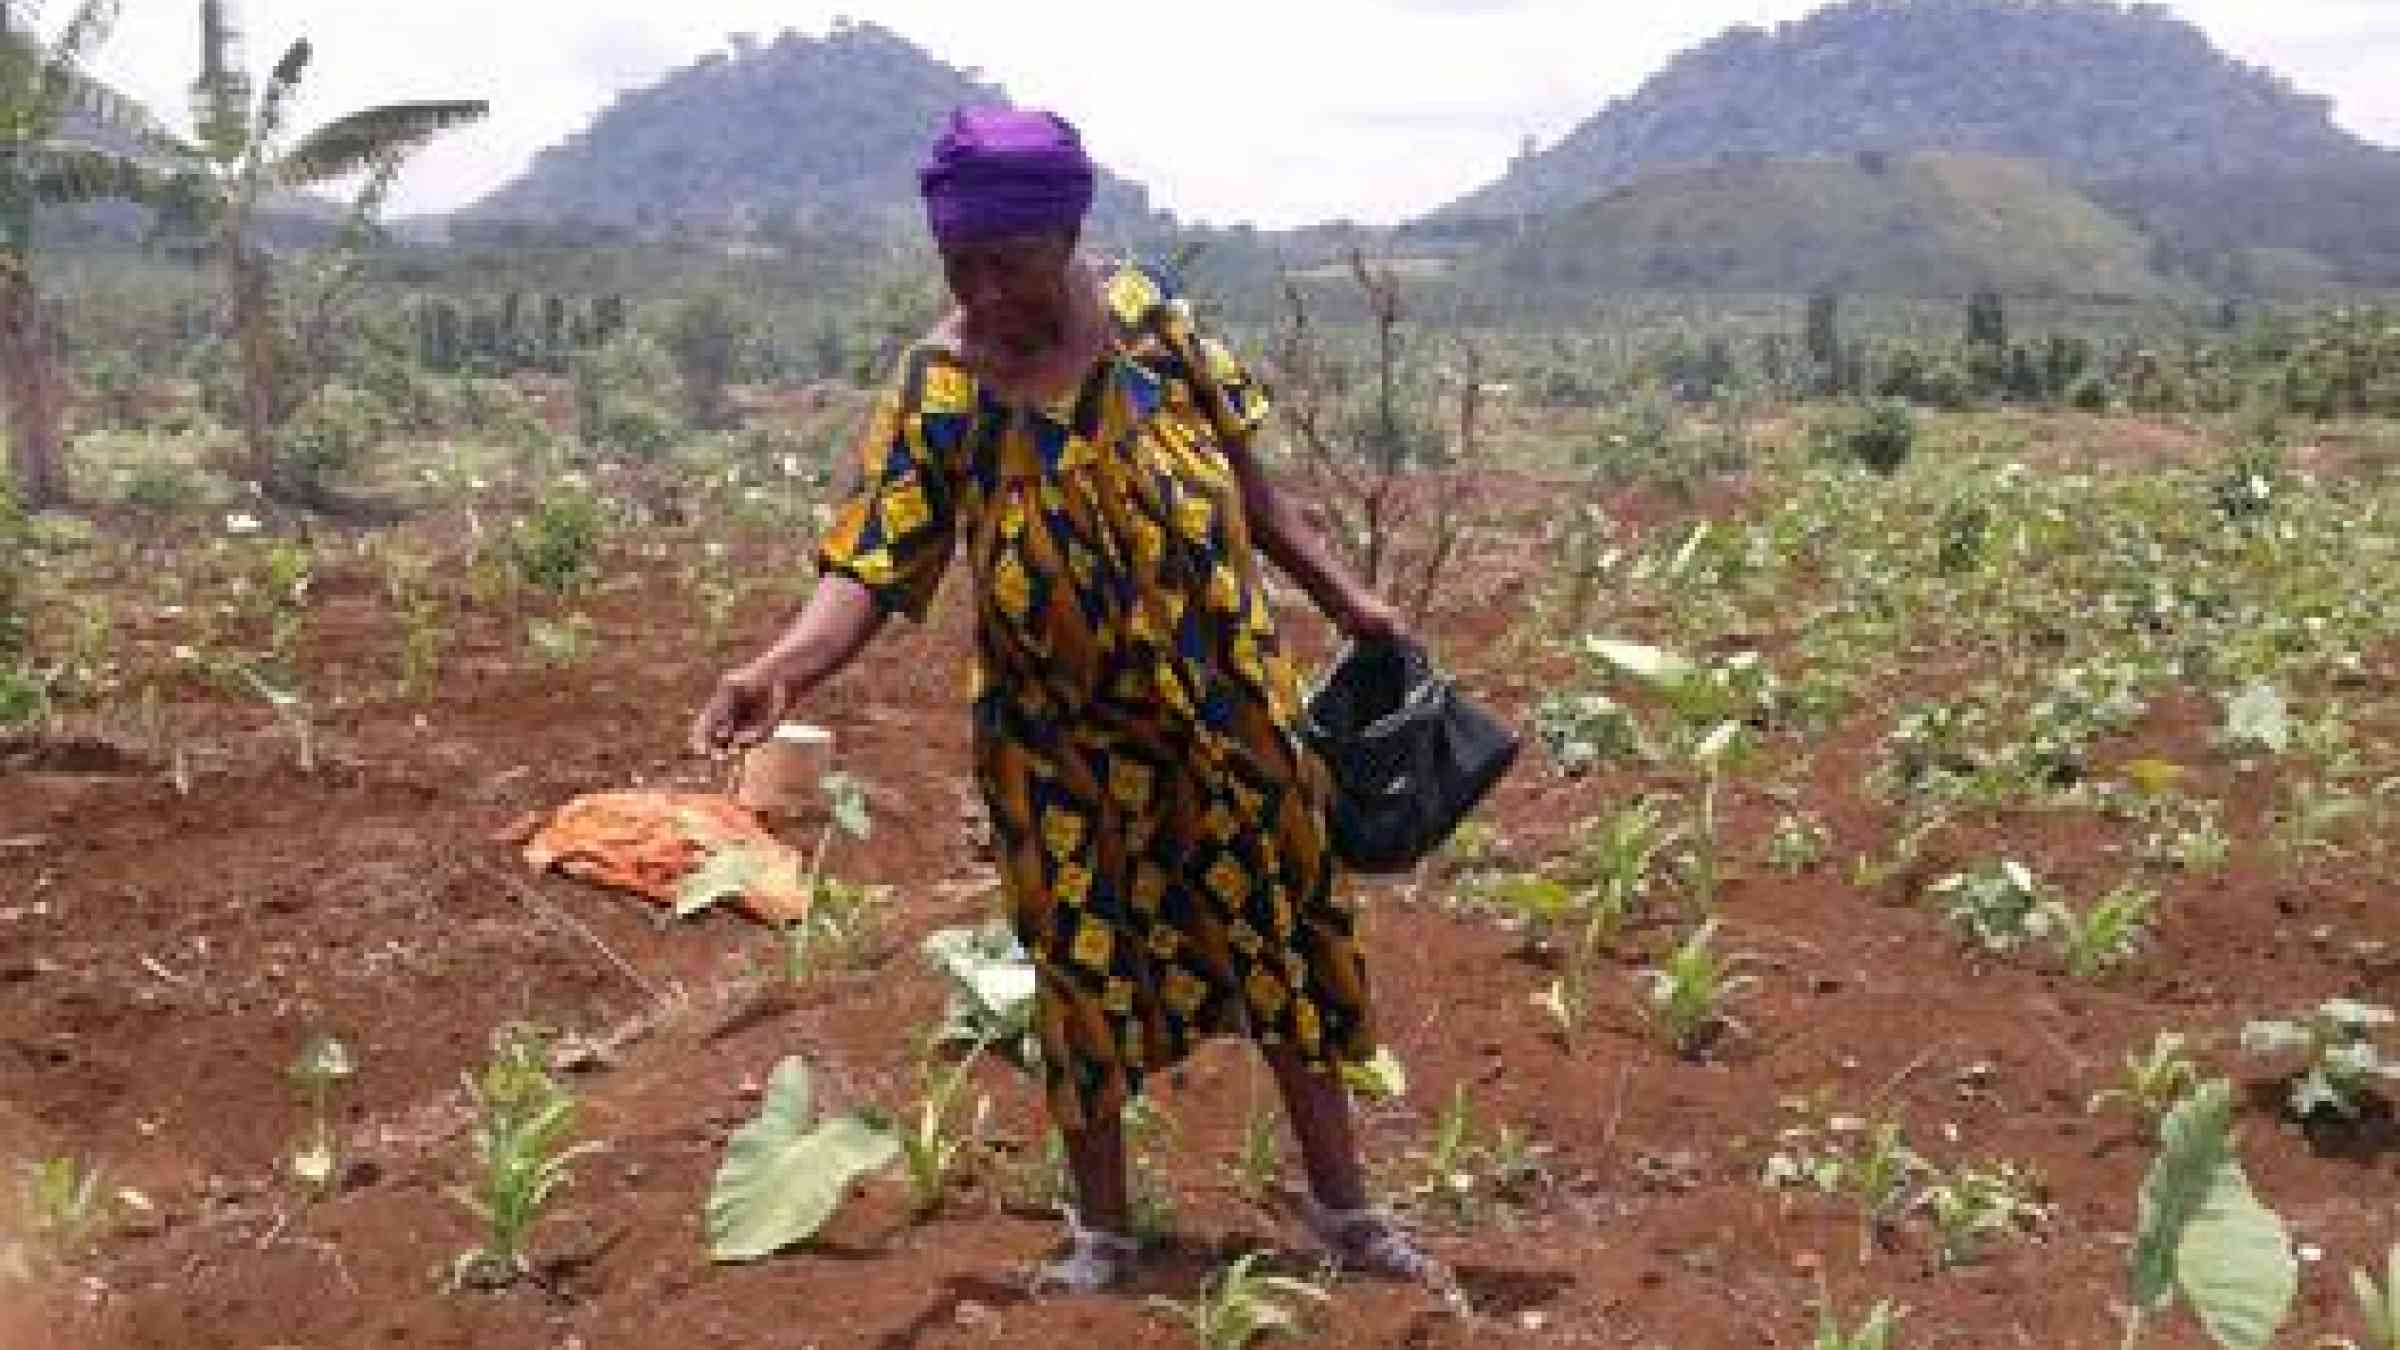 Ms. Lydia Manyi, a subsistence farmer in Akum, northwestern Cameroon, uses traditional knowledge to protect her crop from drought. (Photo: Kingsley Nfor/UNISDR)